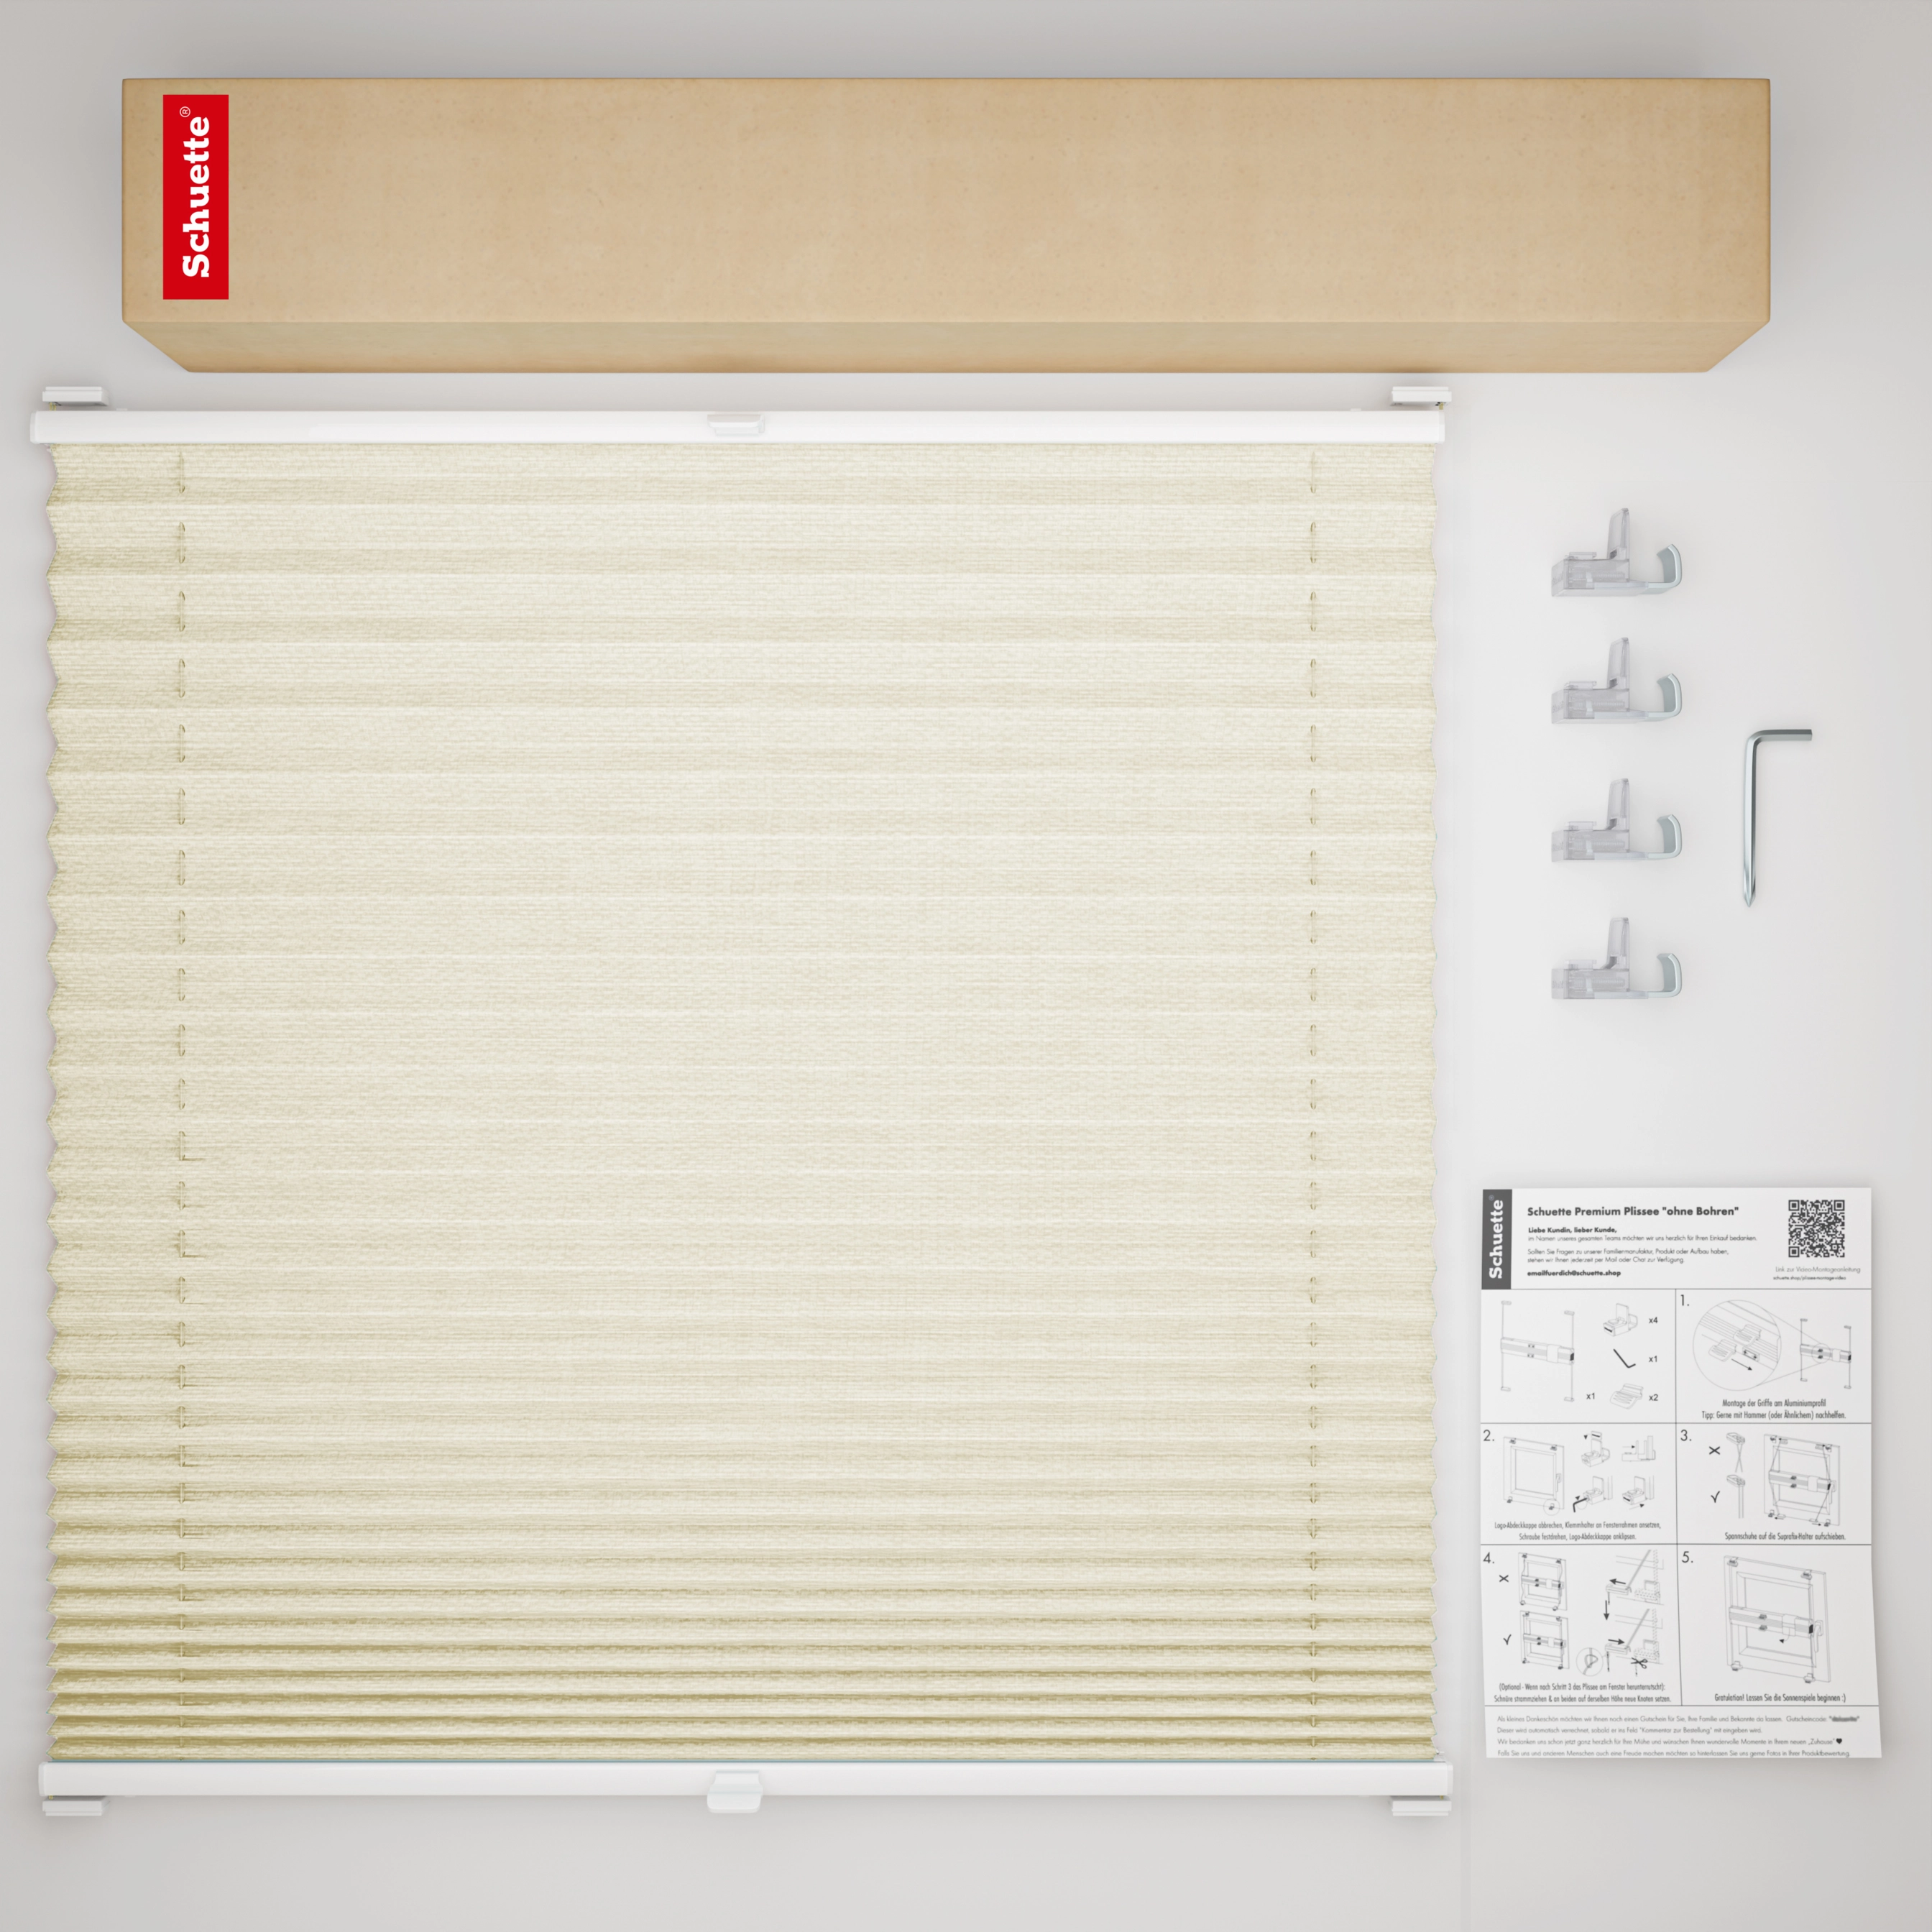 Schuette® Pleated Blind Made to Measure without Drilling • Dolomite Collection: Wet Stand (Beige) • Profile Colour: White